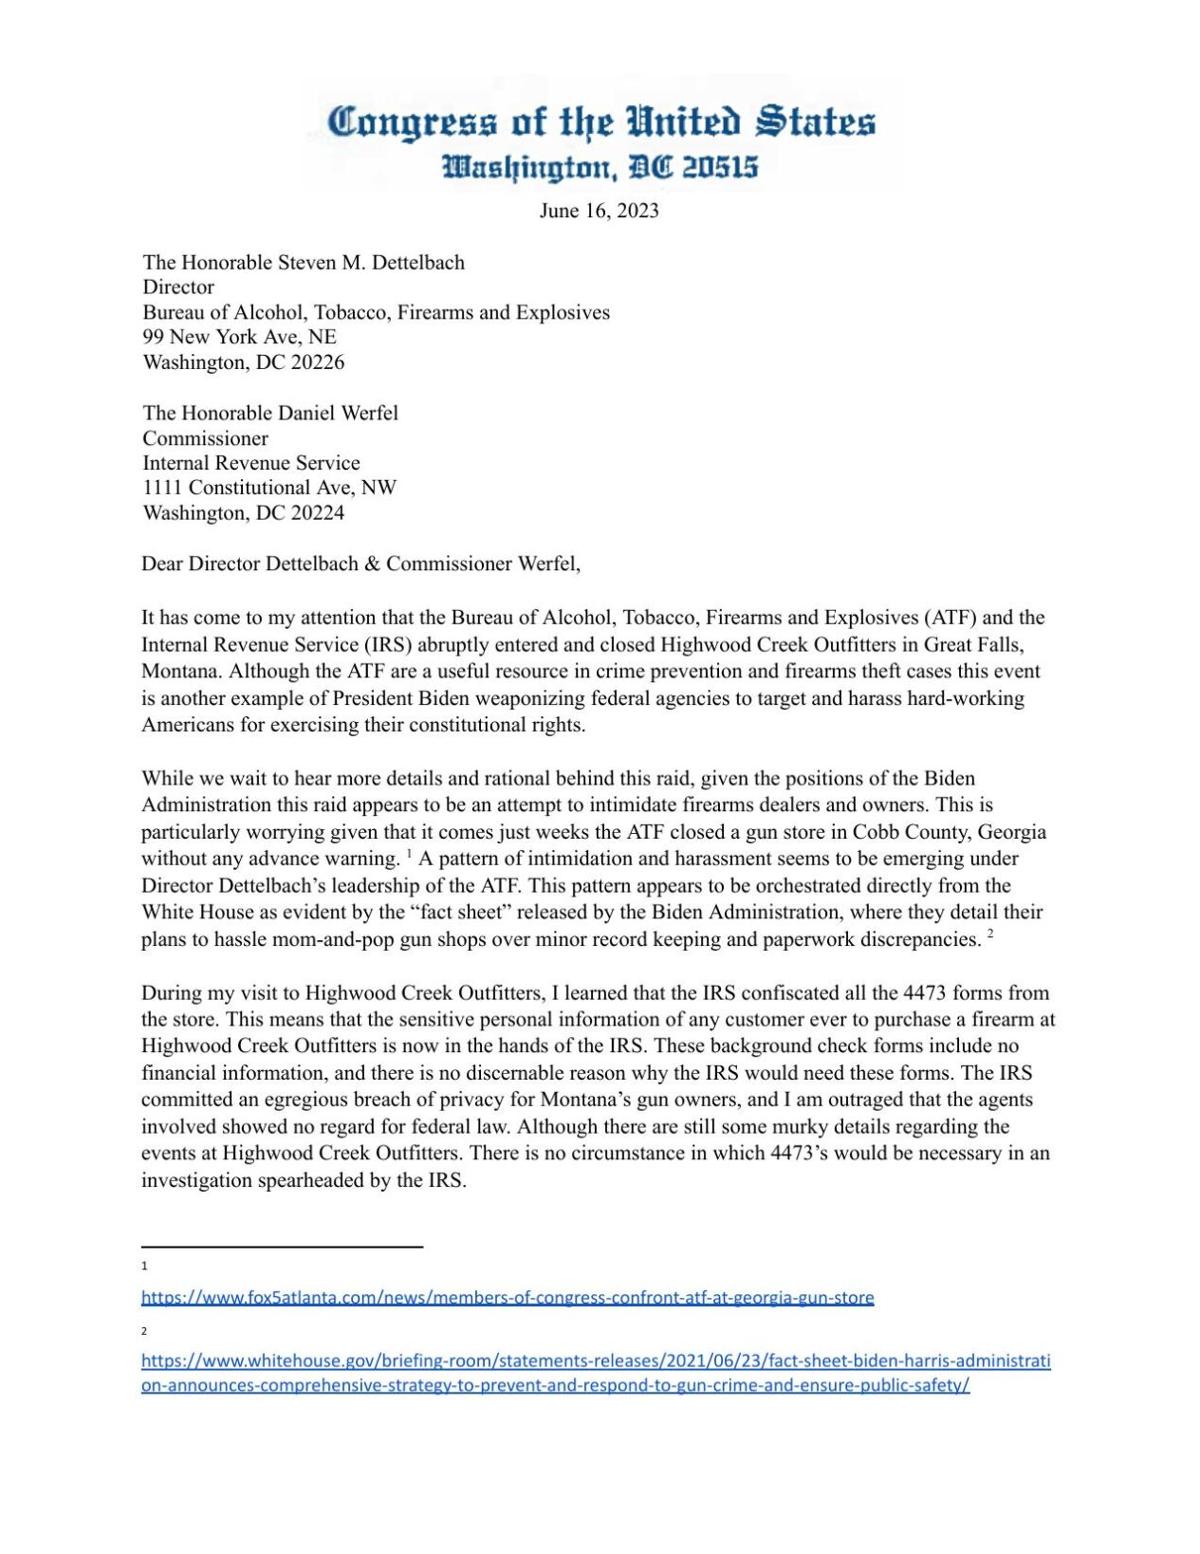 Rep. Rosendale letter to ATF and IRS